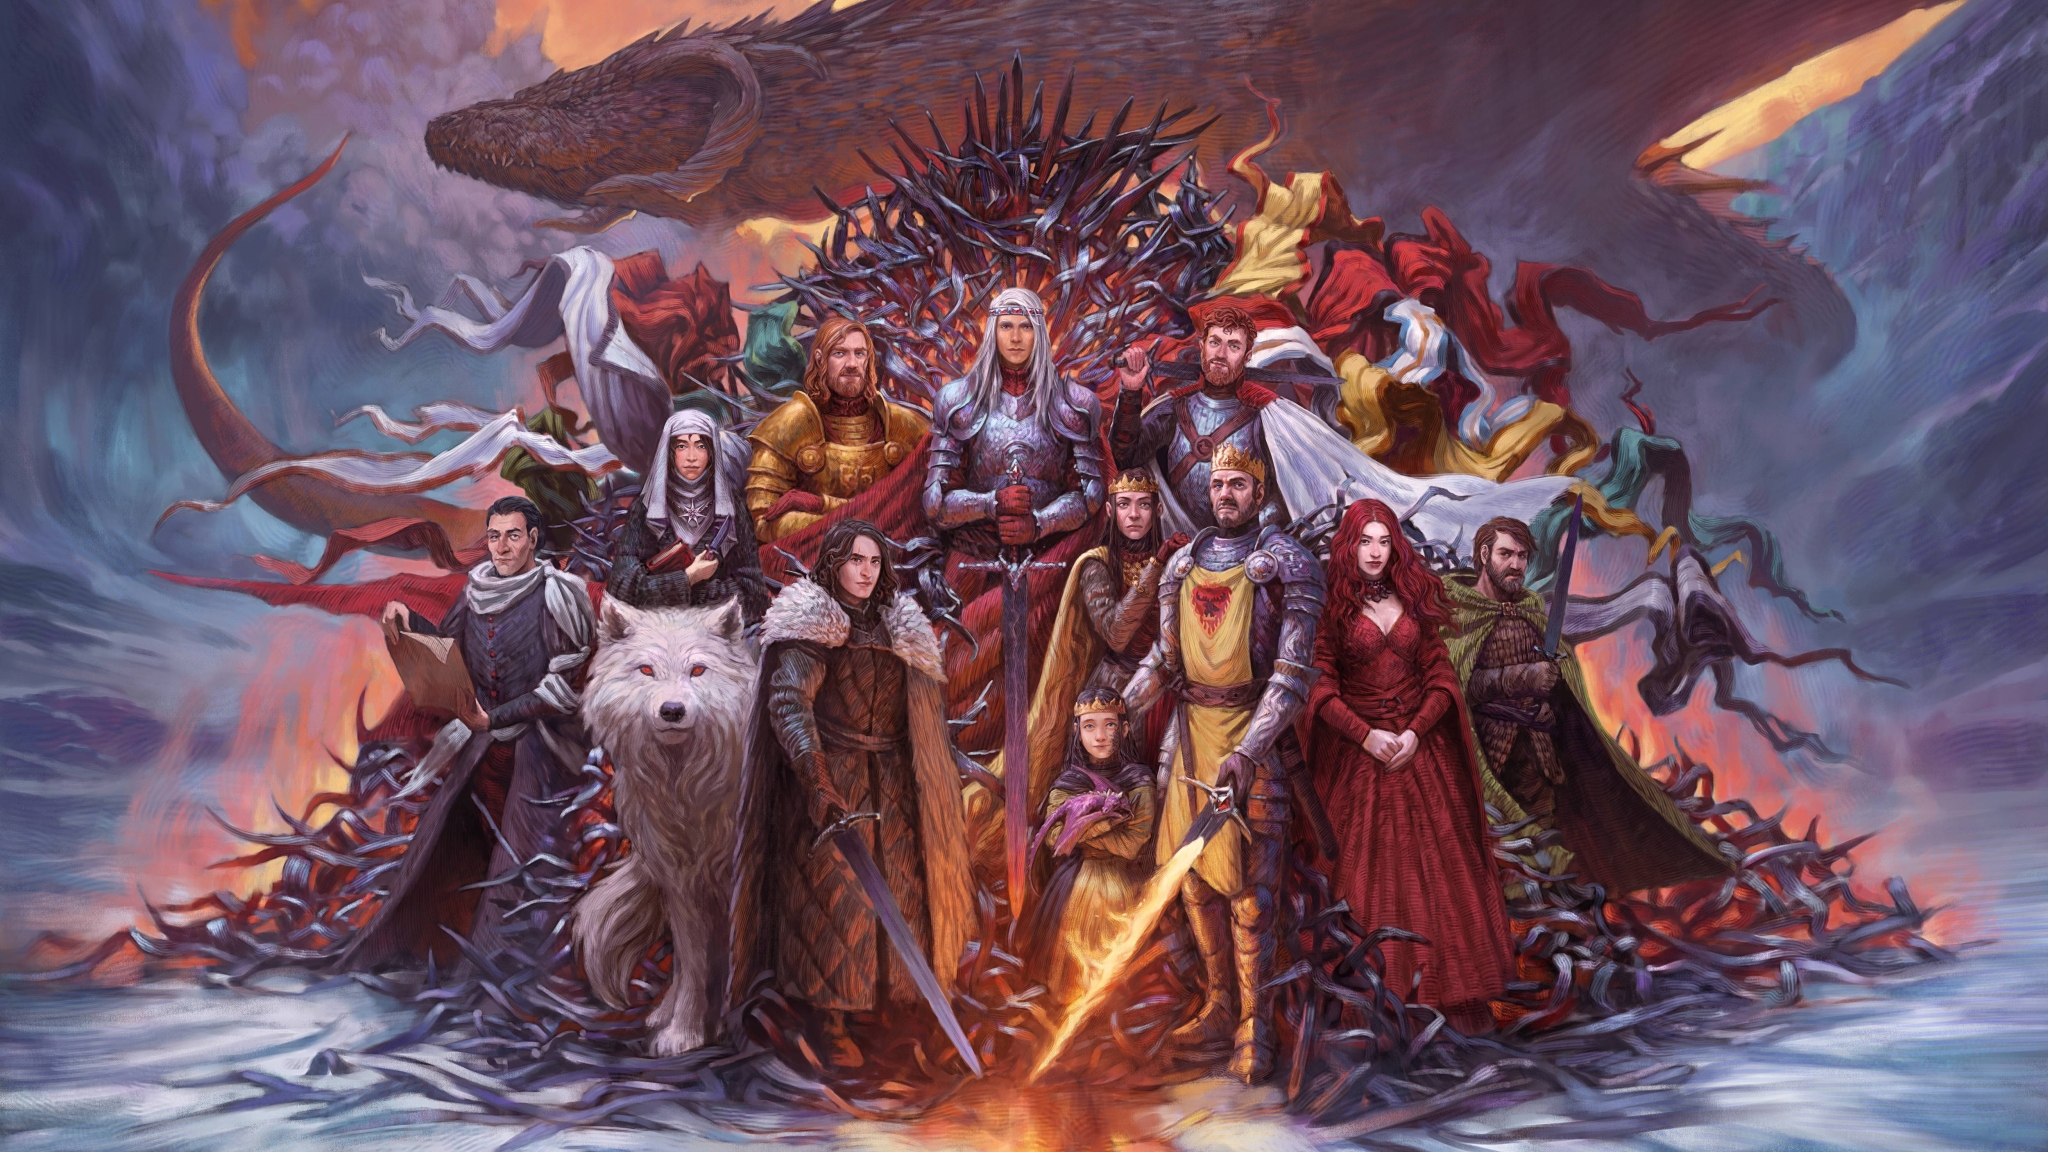 48x1152 A Song Of Ice And Fire Got 48x1152 Resolution Wallpaper Hd Fantasy 4k Wallpapers Images Photos And Background